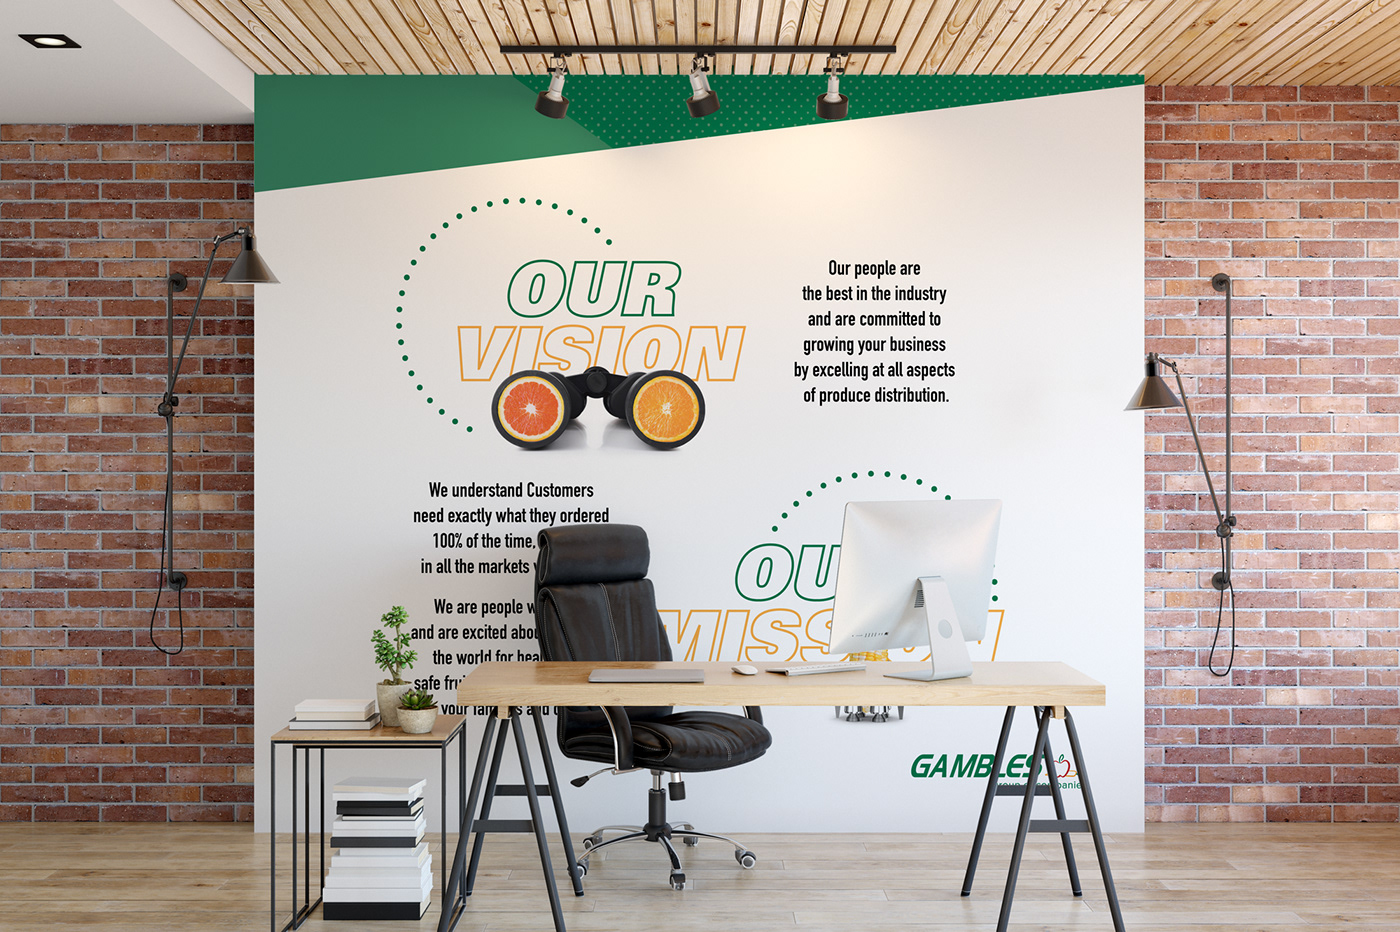 branding  company values Corporate Design mission statement poster print design  Signage Values Wall Graphics